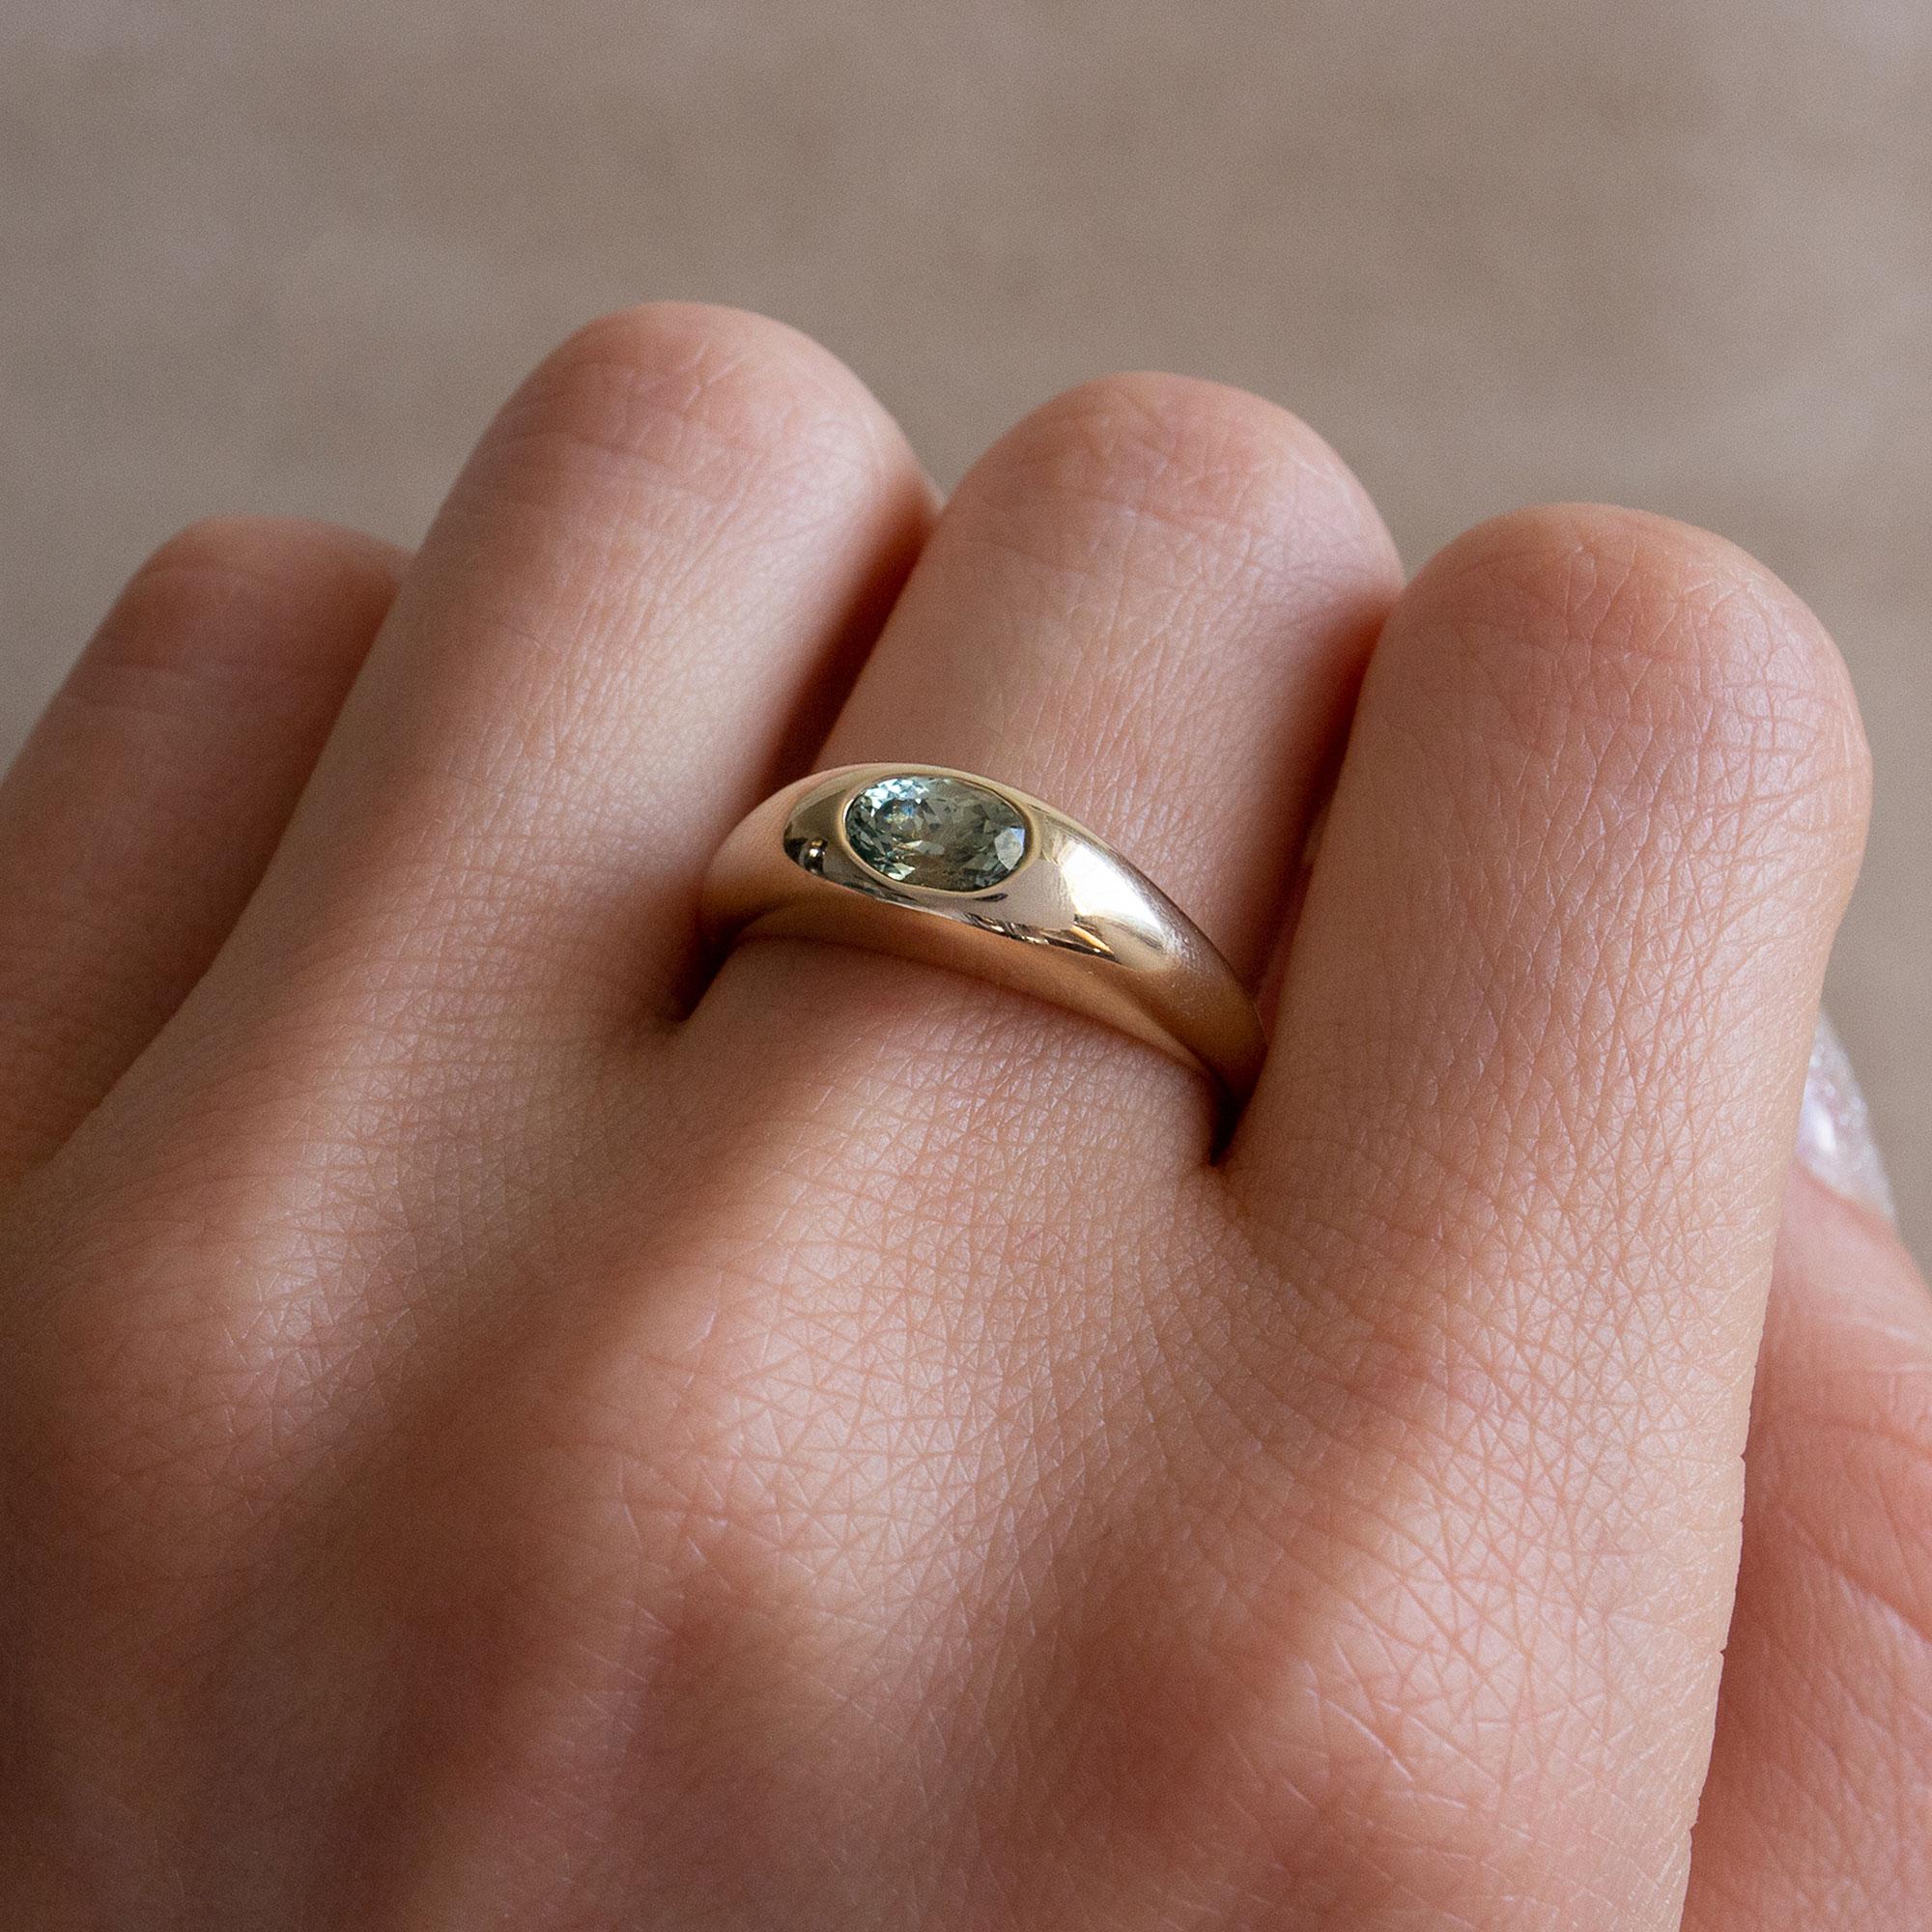 Risa is a solid, signet-style ring with a soft, smooth touch. The original inspiration came from an early 14th century British stirrup ring. I plumped it up to add a luxurious weightiness and added a pool of color at is peak.

0.6CT LIGHT GREEN